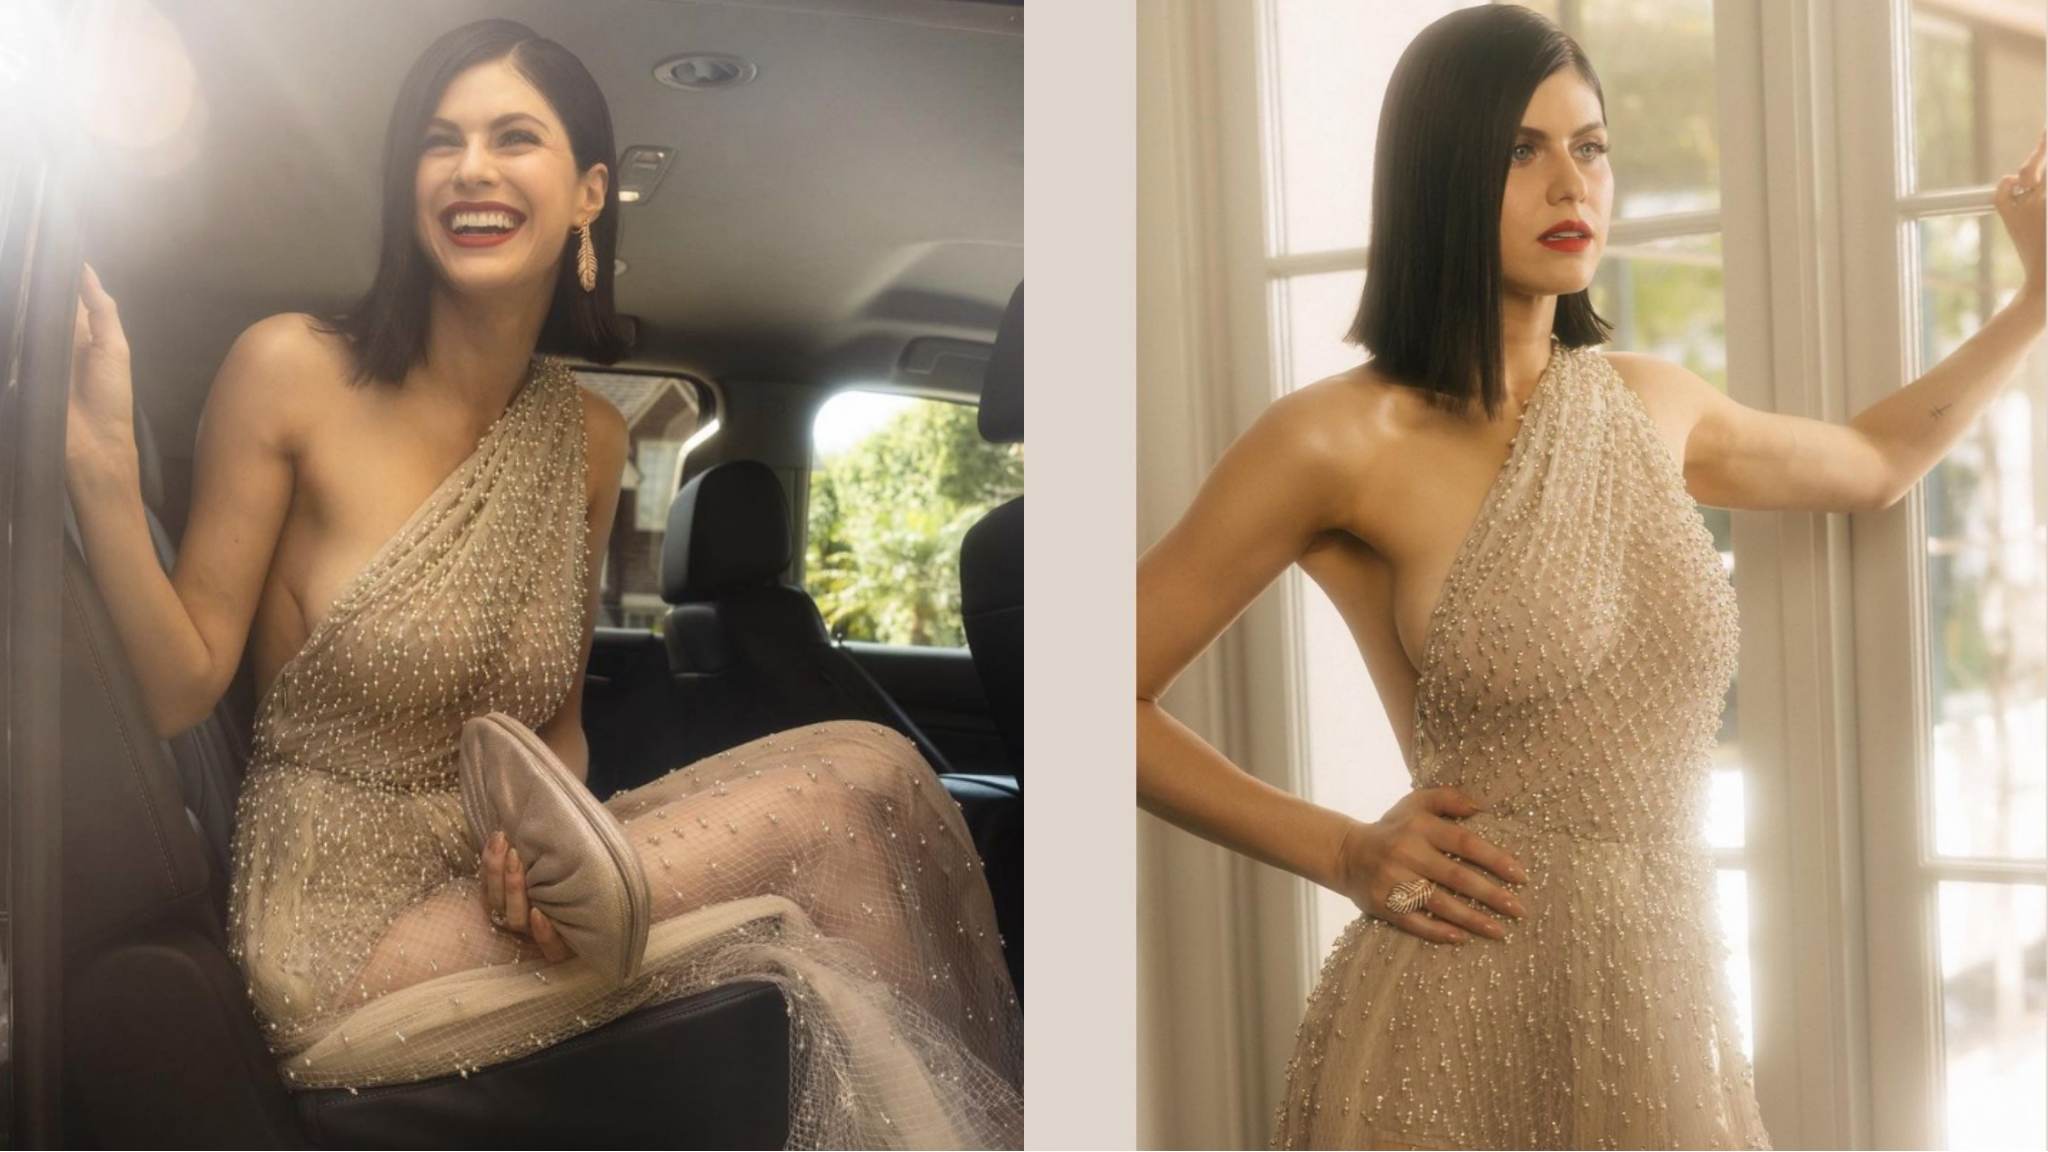 Alexandra Daddario: The Actress Who Is Taking Hollywood by Storm